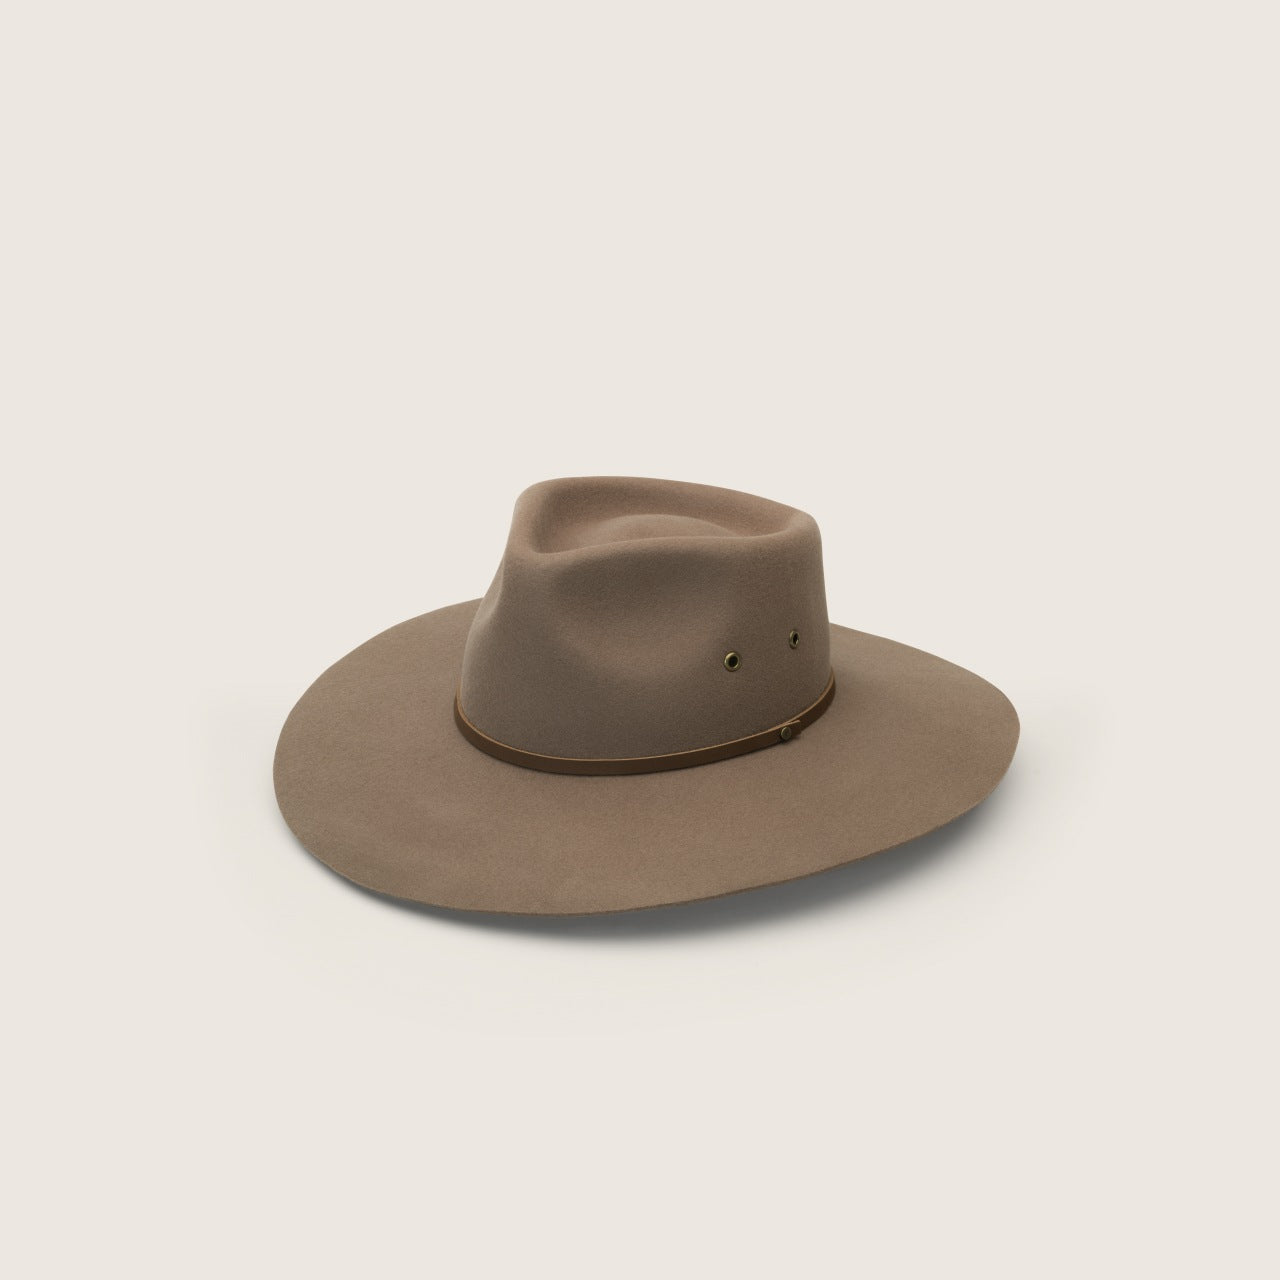 Australian Outback Explorer hat taupe brown